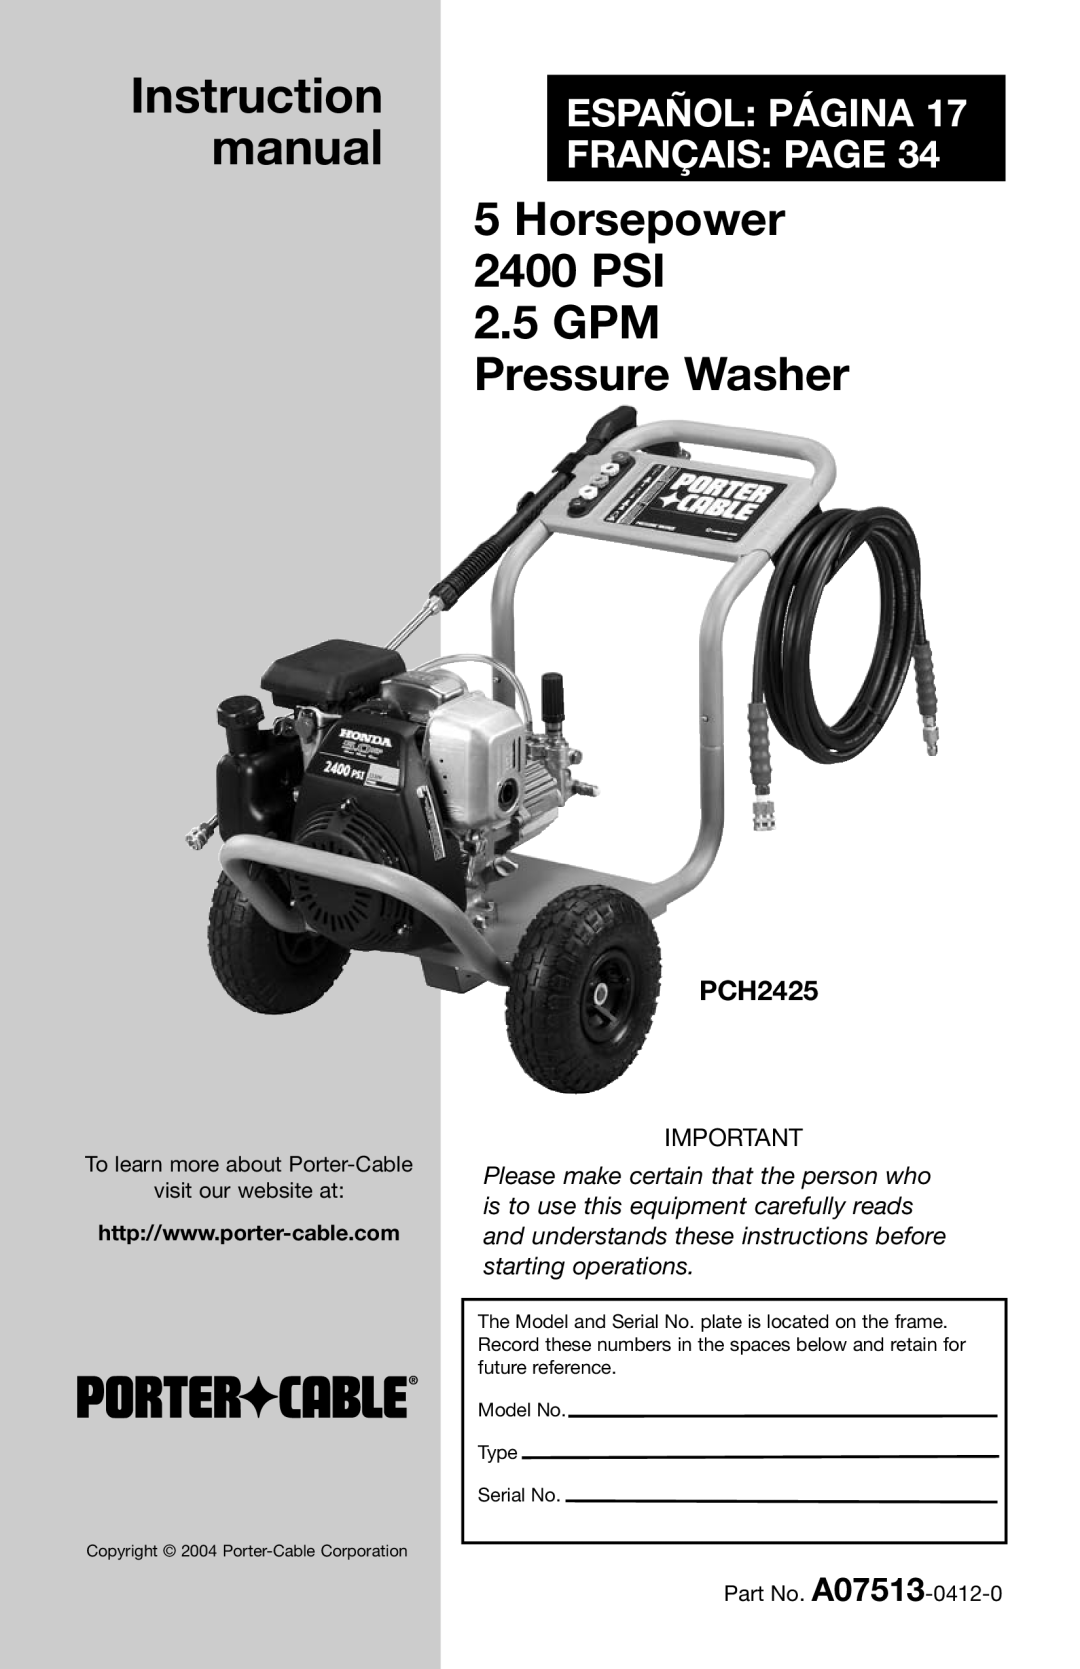 Porter-Cable A07513-0412-0 instruction manual PCH2425, 5Horsepower 2400 PSI, GPM Pressure Washer 